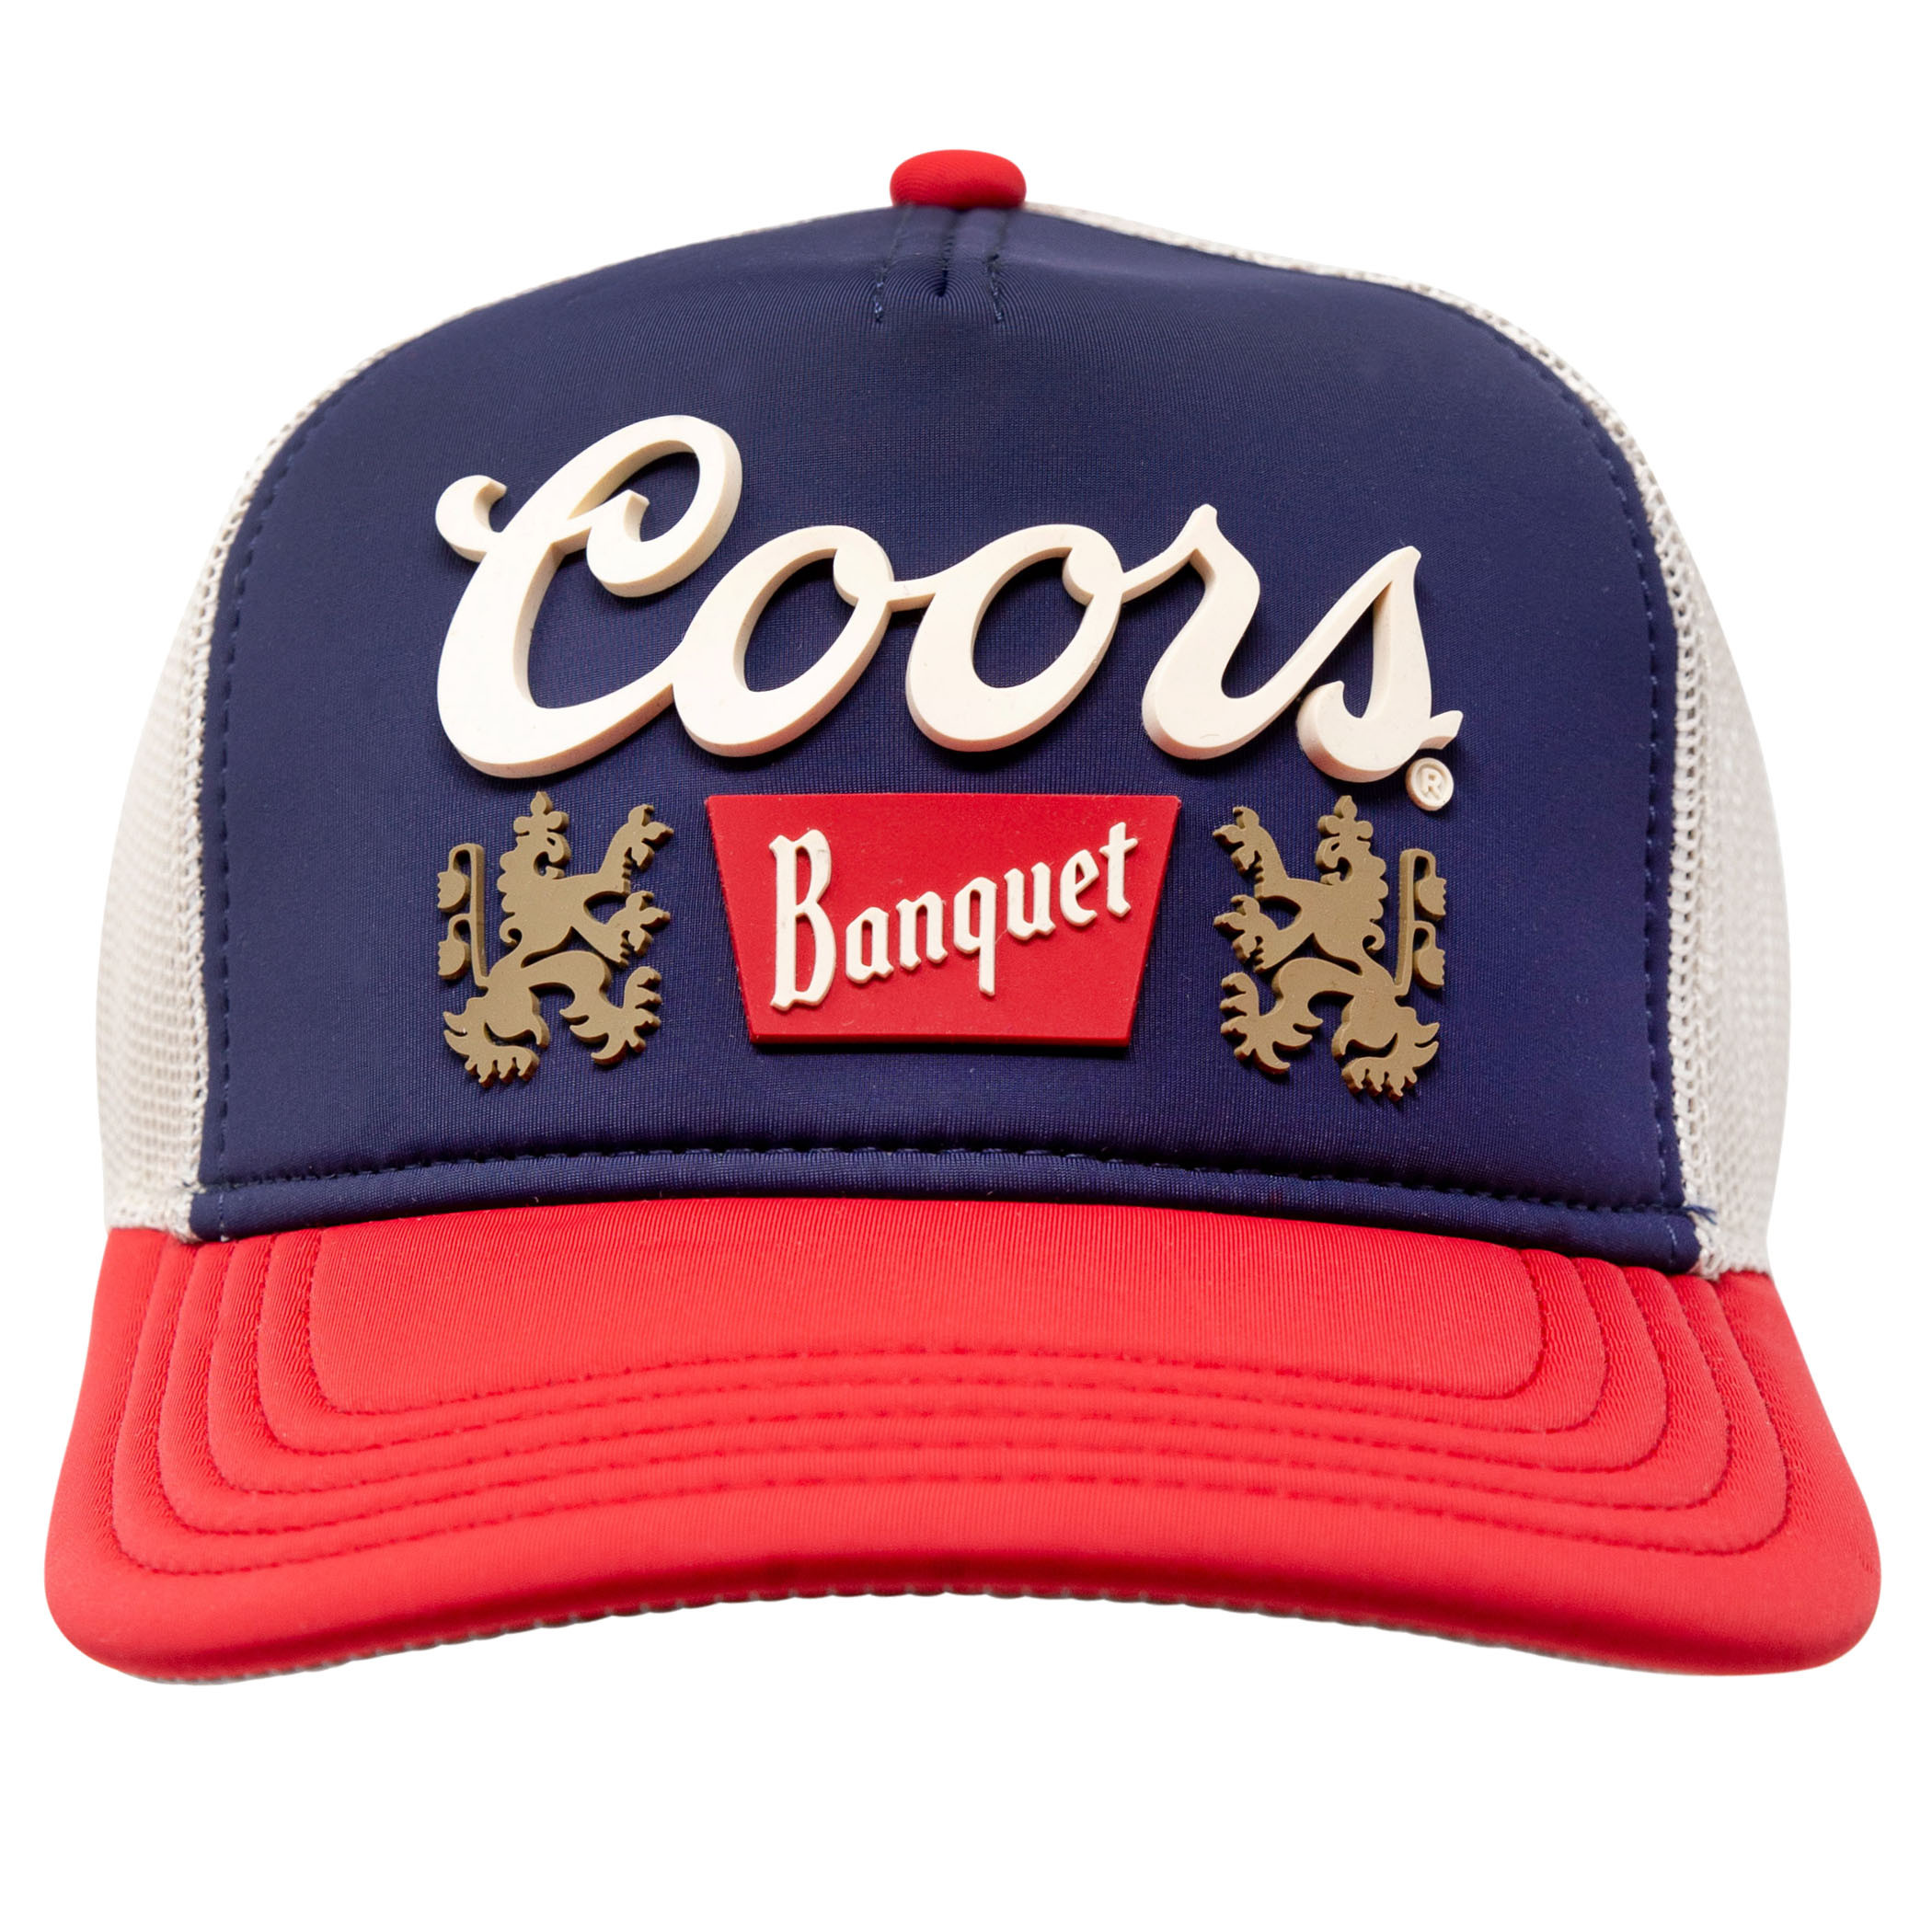 Coors Banquet Red White and Blue Vintage Hat